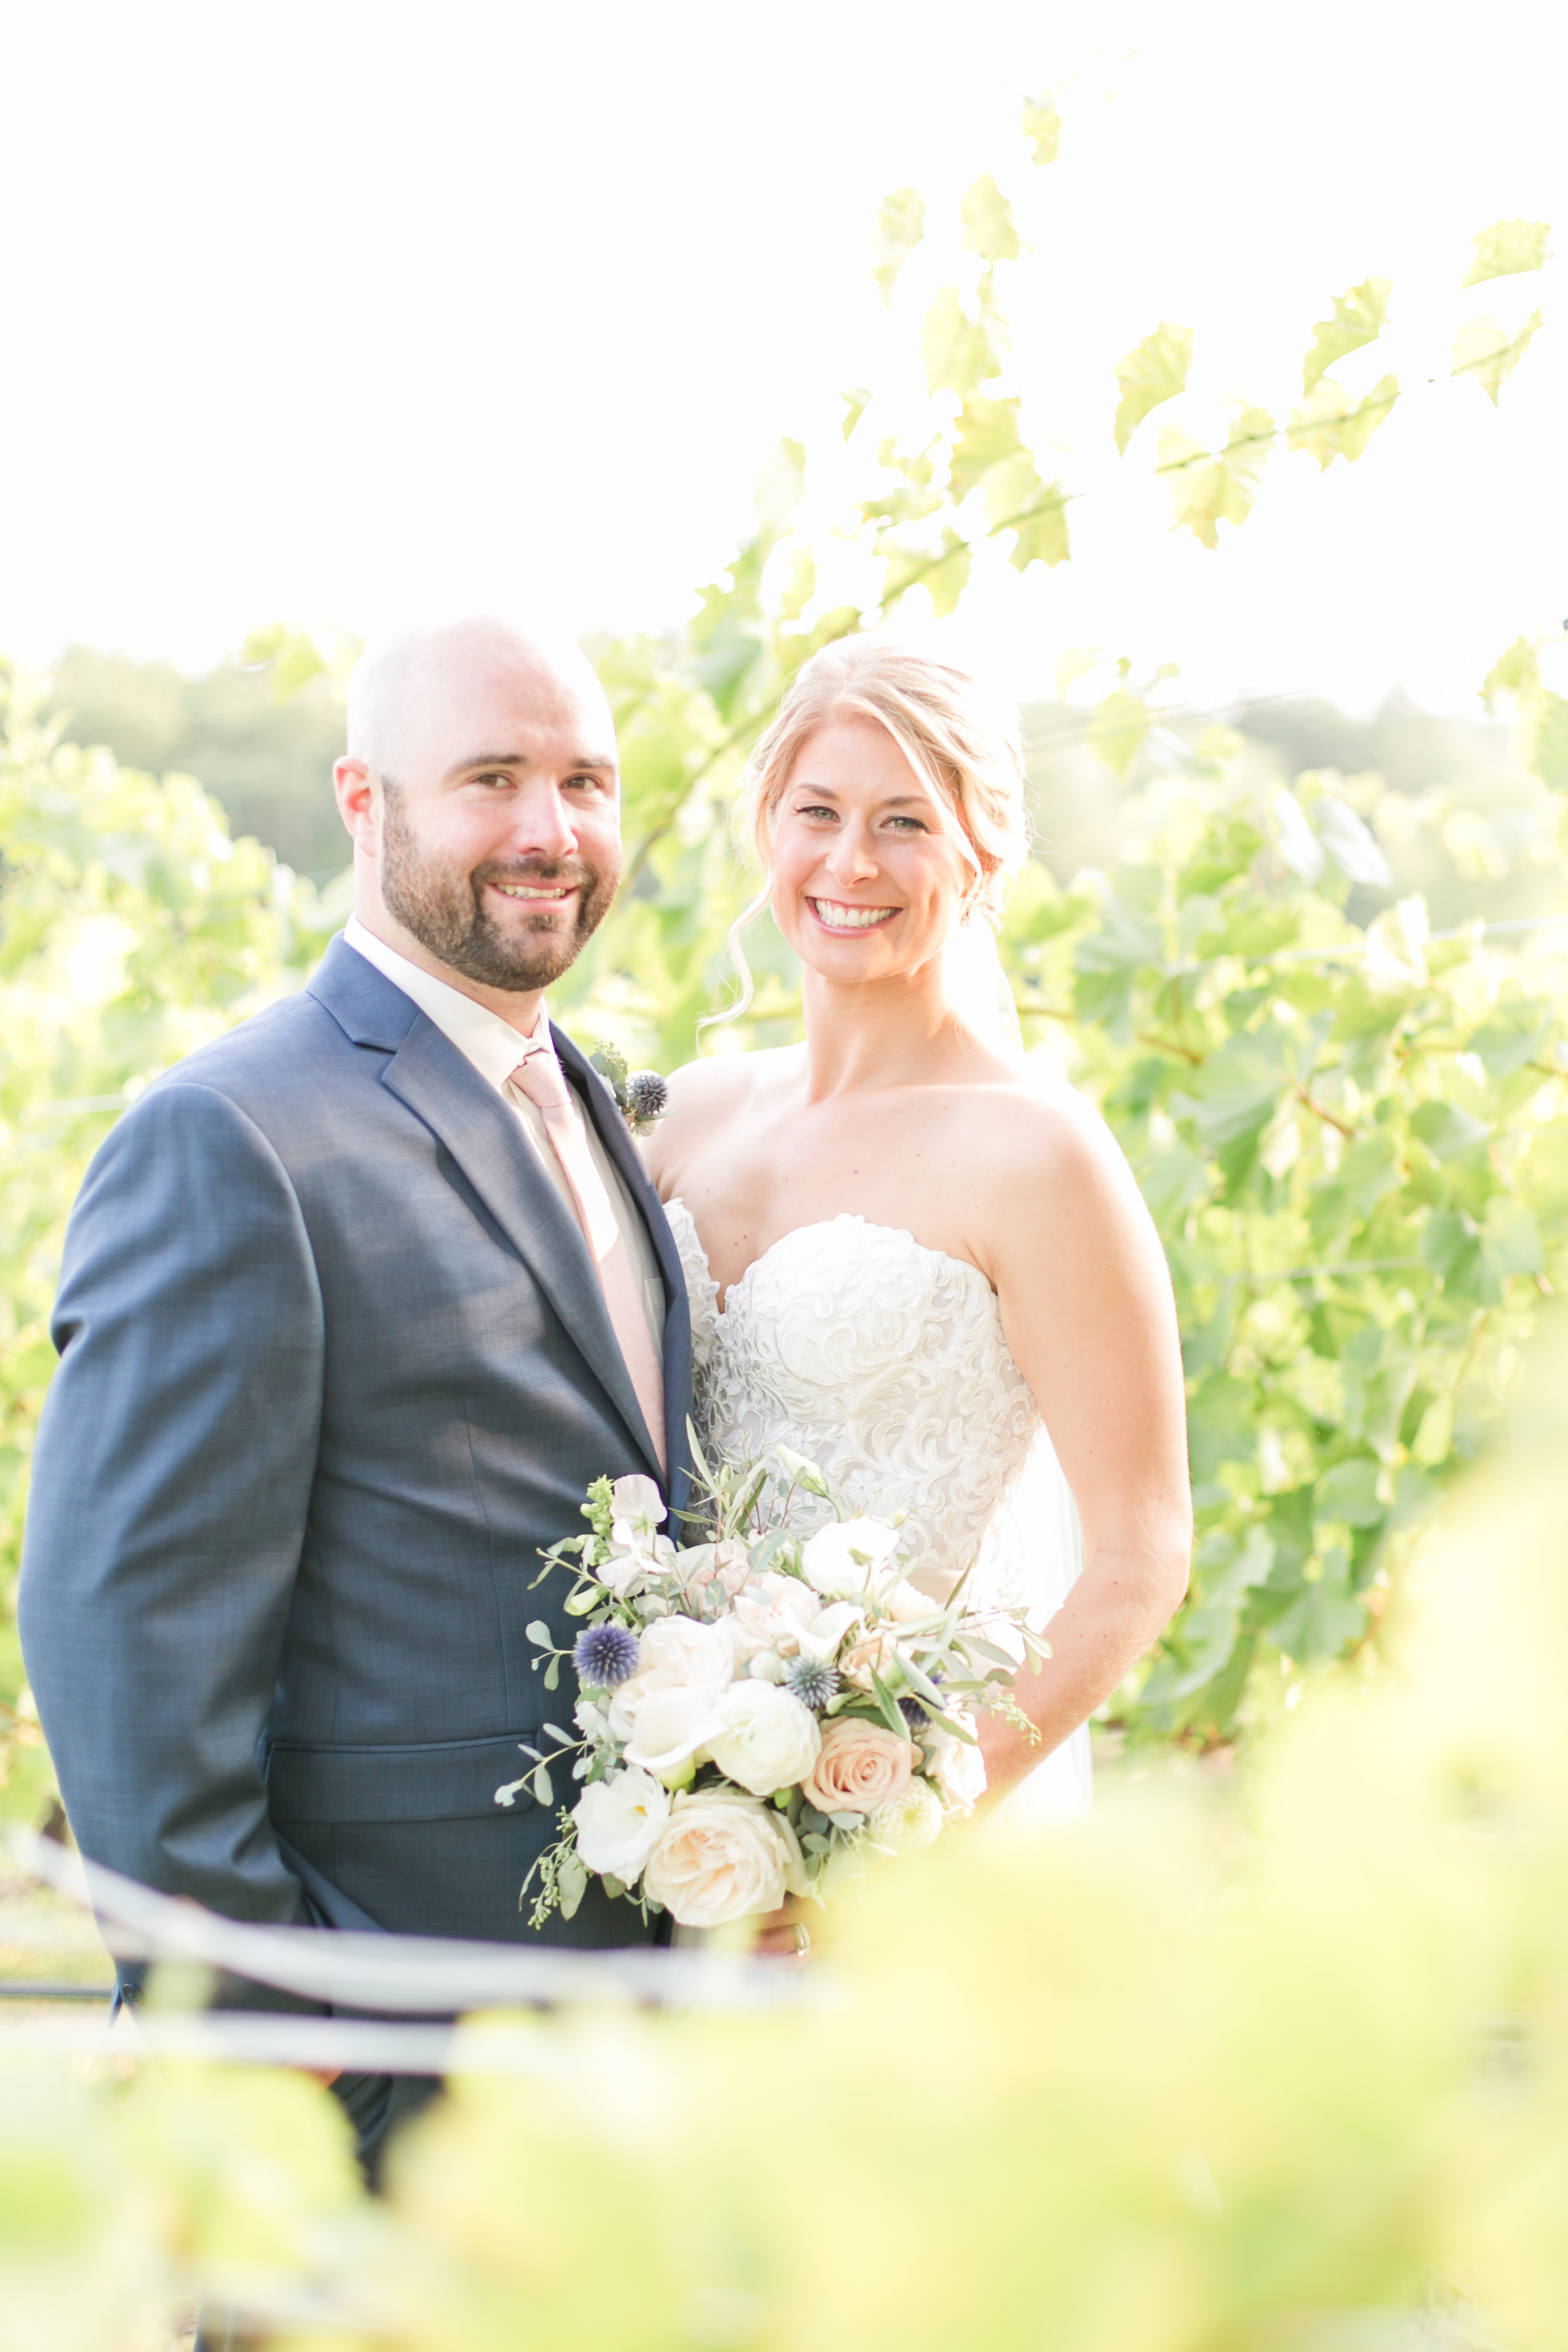 lee nh wedding photographer | amy brown photography | flag hill winery wedding  